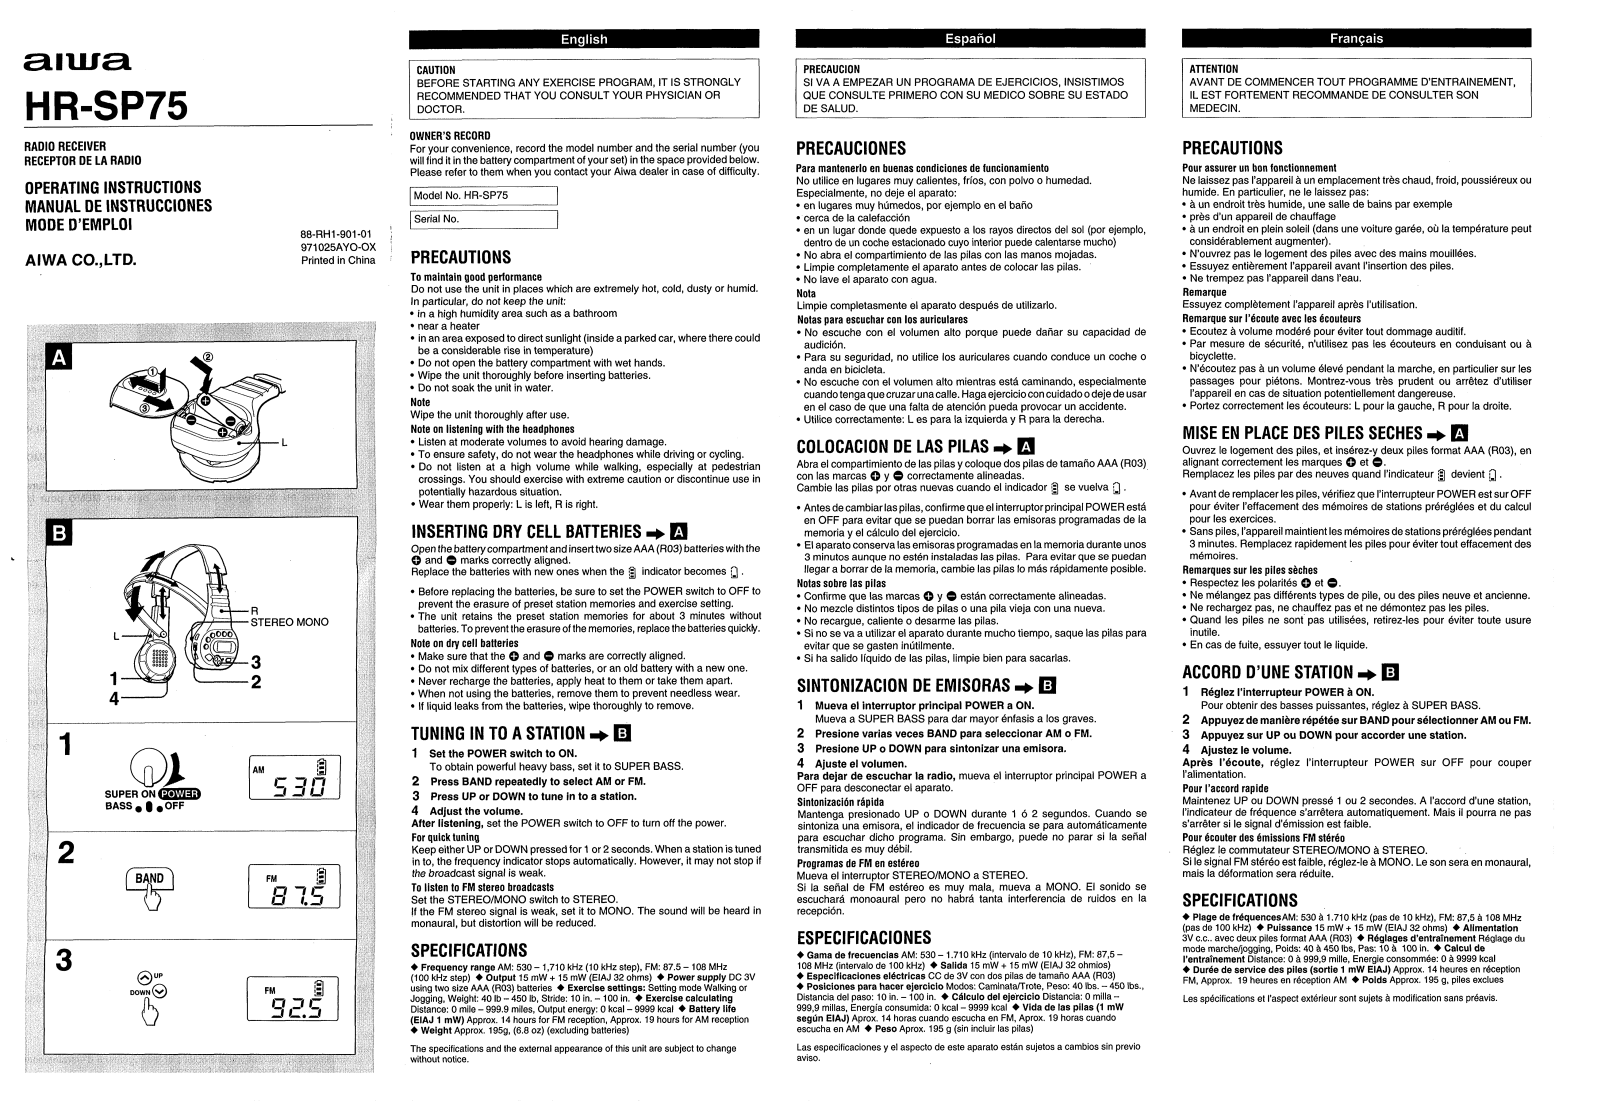 Sony HR-SP75 OPERATING MANUAL